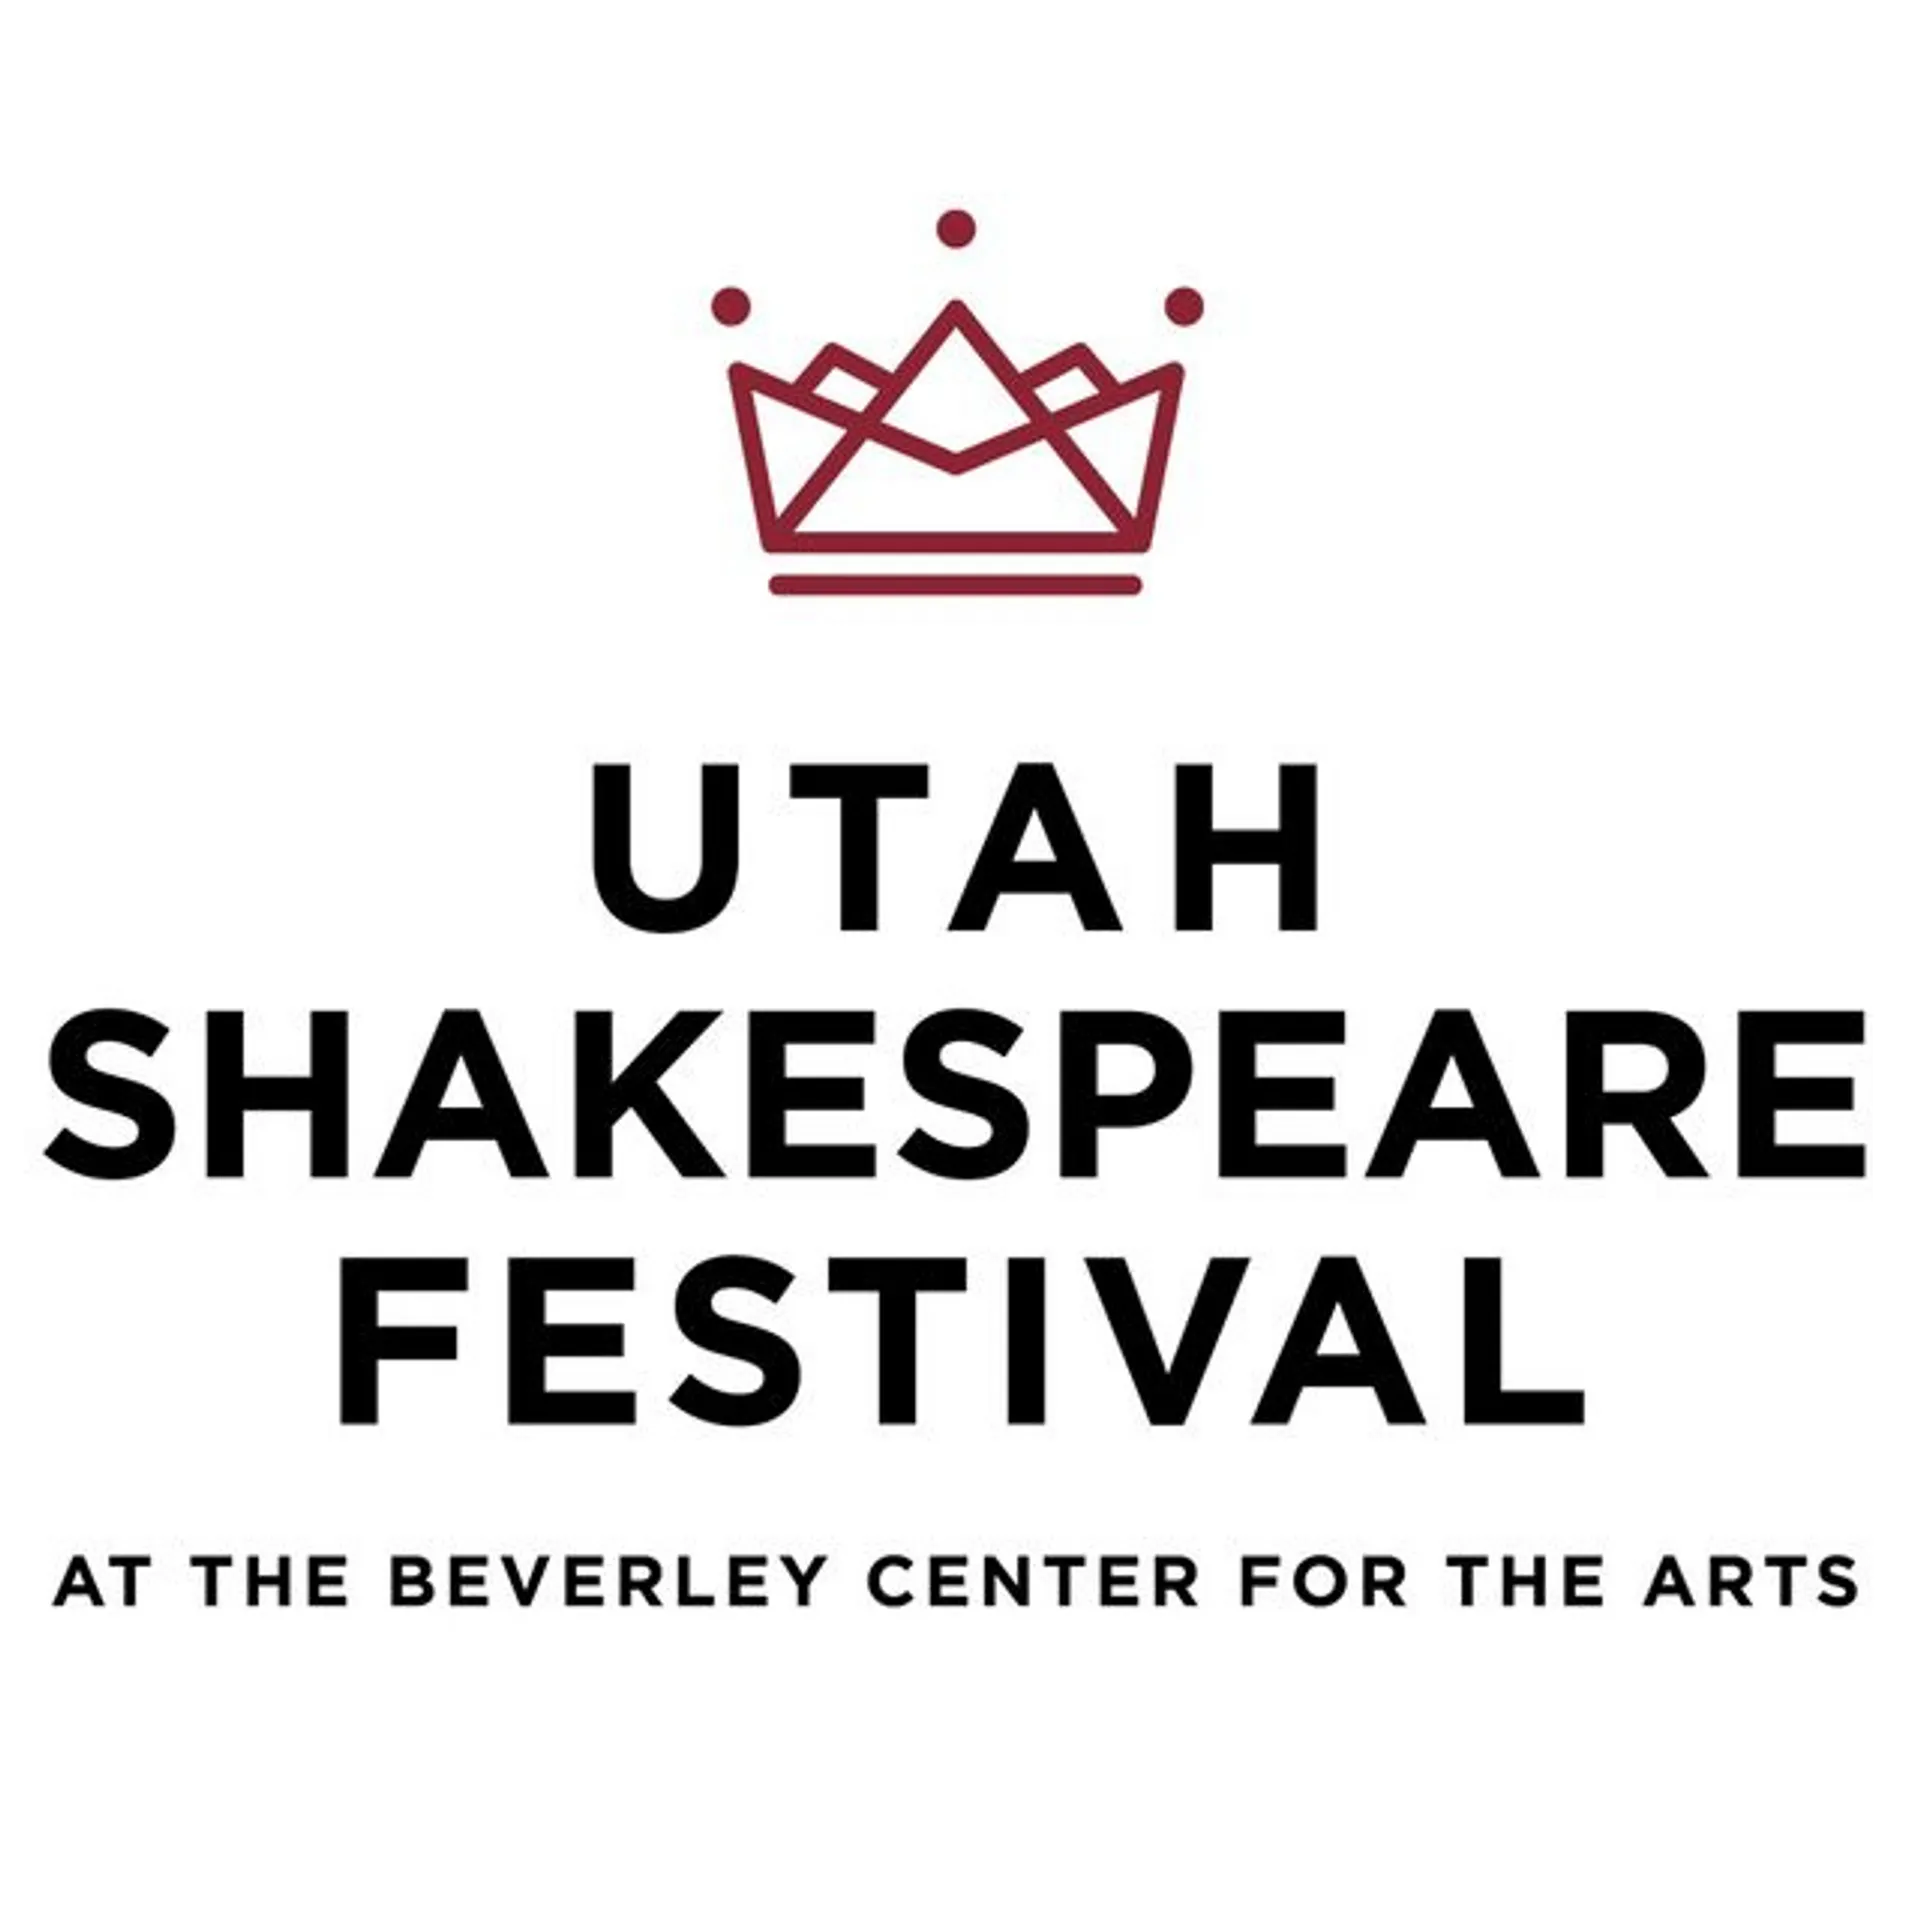 Utah Shakespeare Festival to perform Much Ado About Nothing at the